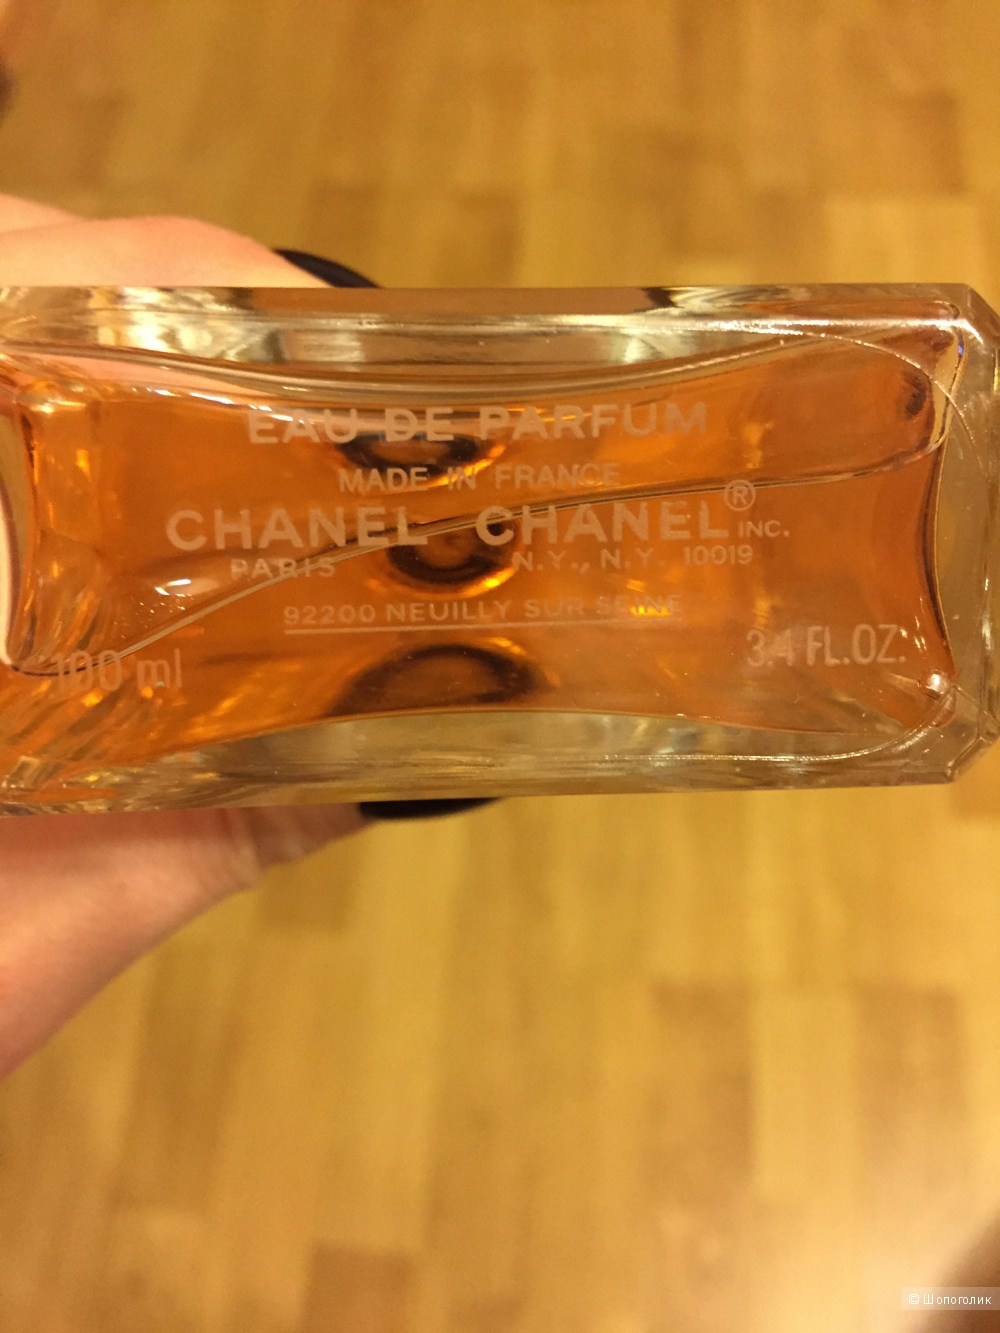 Chanel Coco Mademoiselle 100 мл